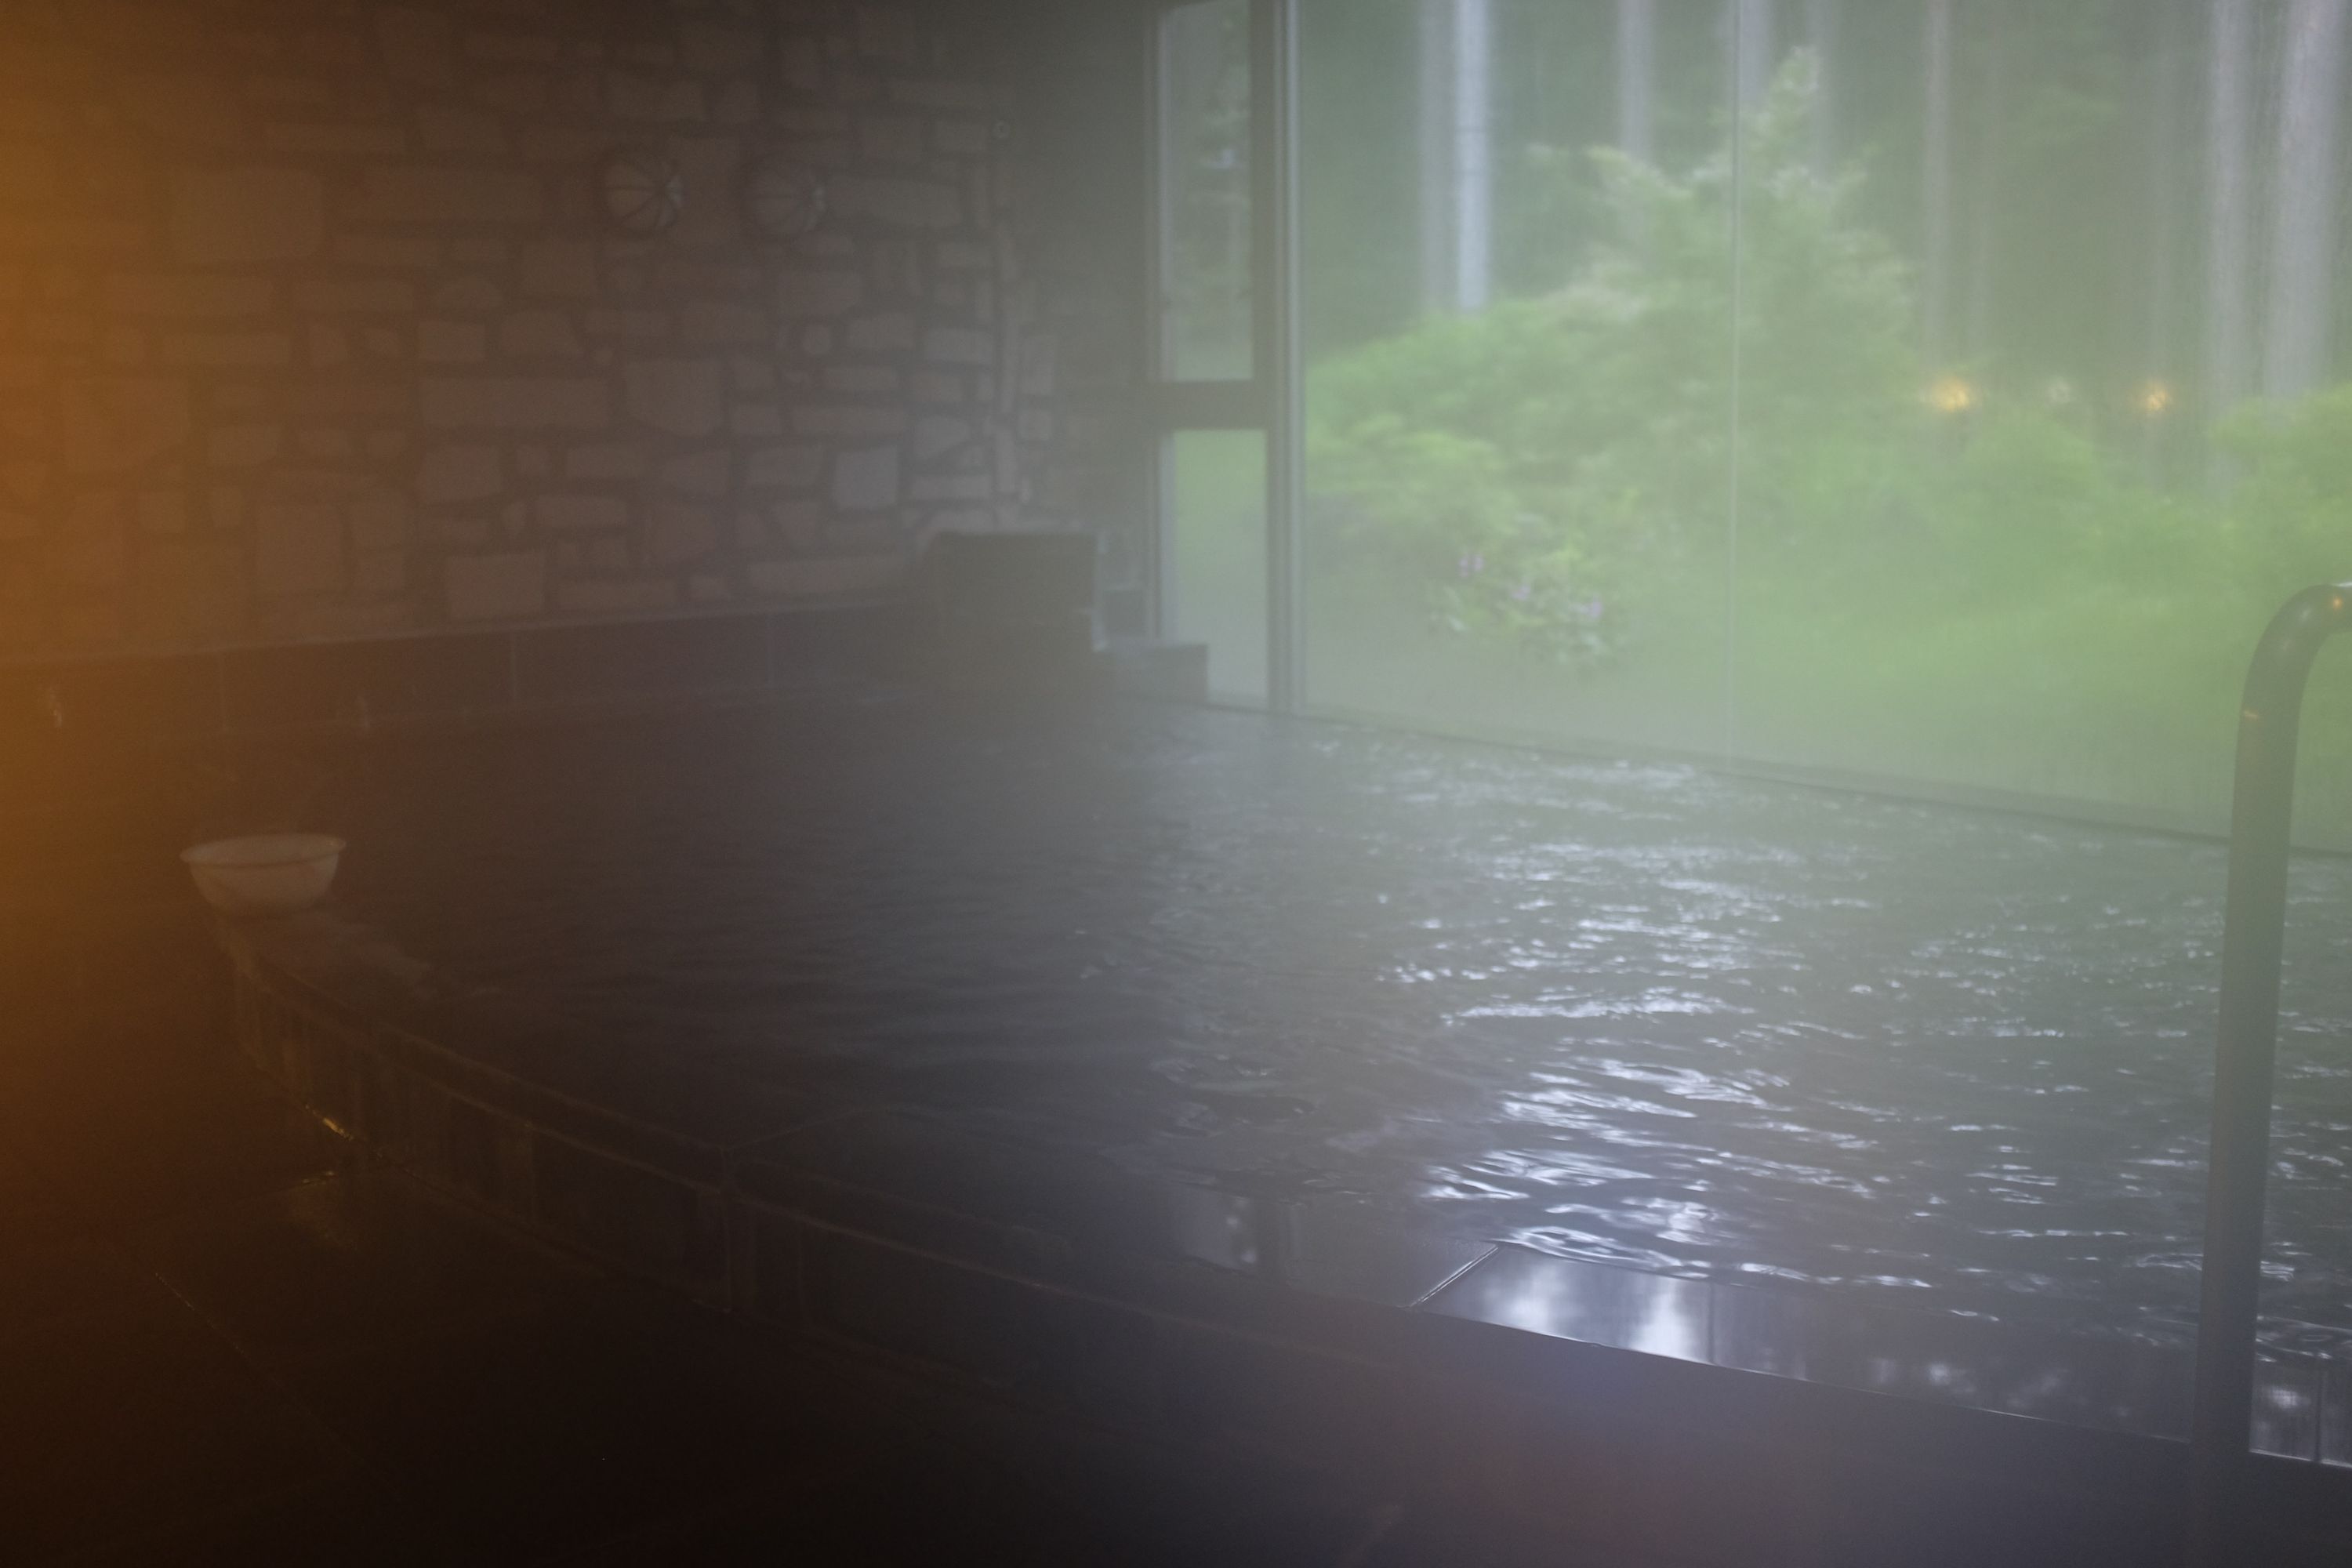 The bathtub of a bathhouse is separated from the forest by a large window, but you can barely see anything from the steam.